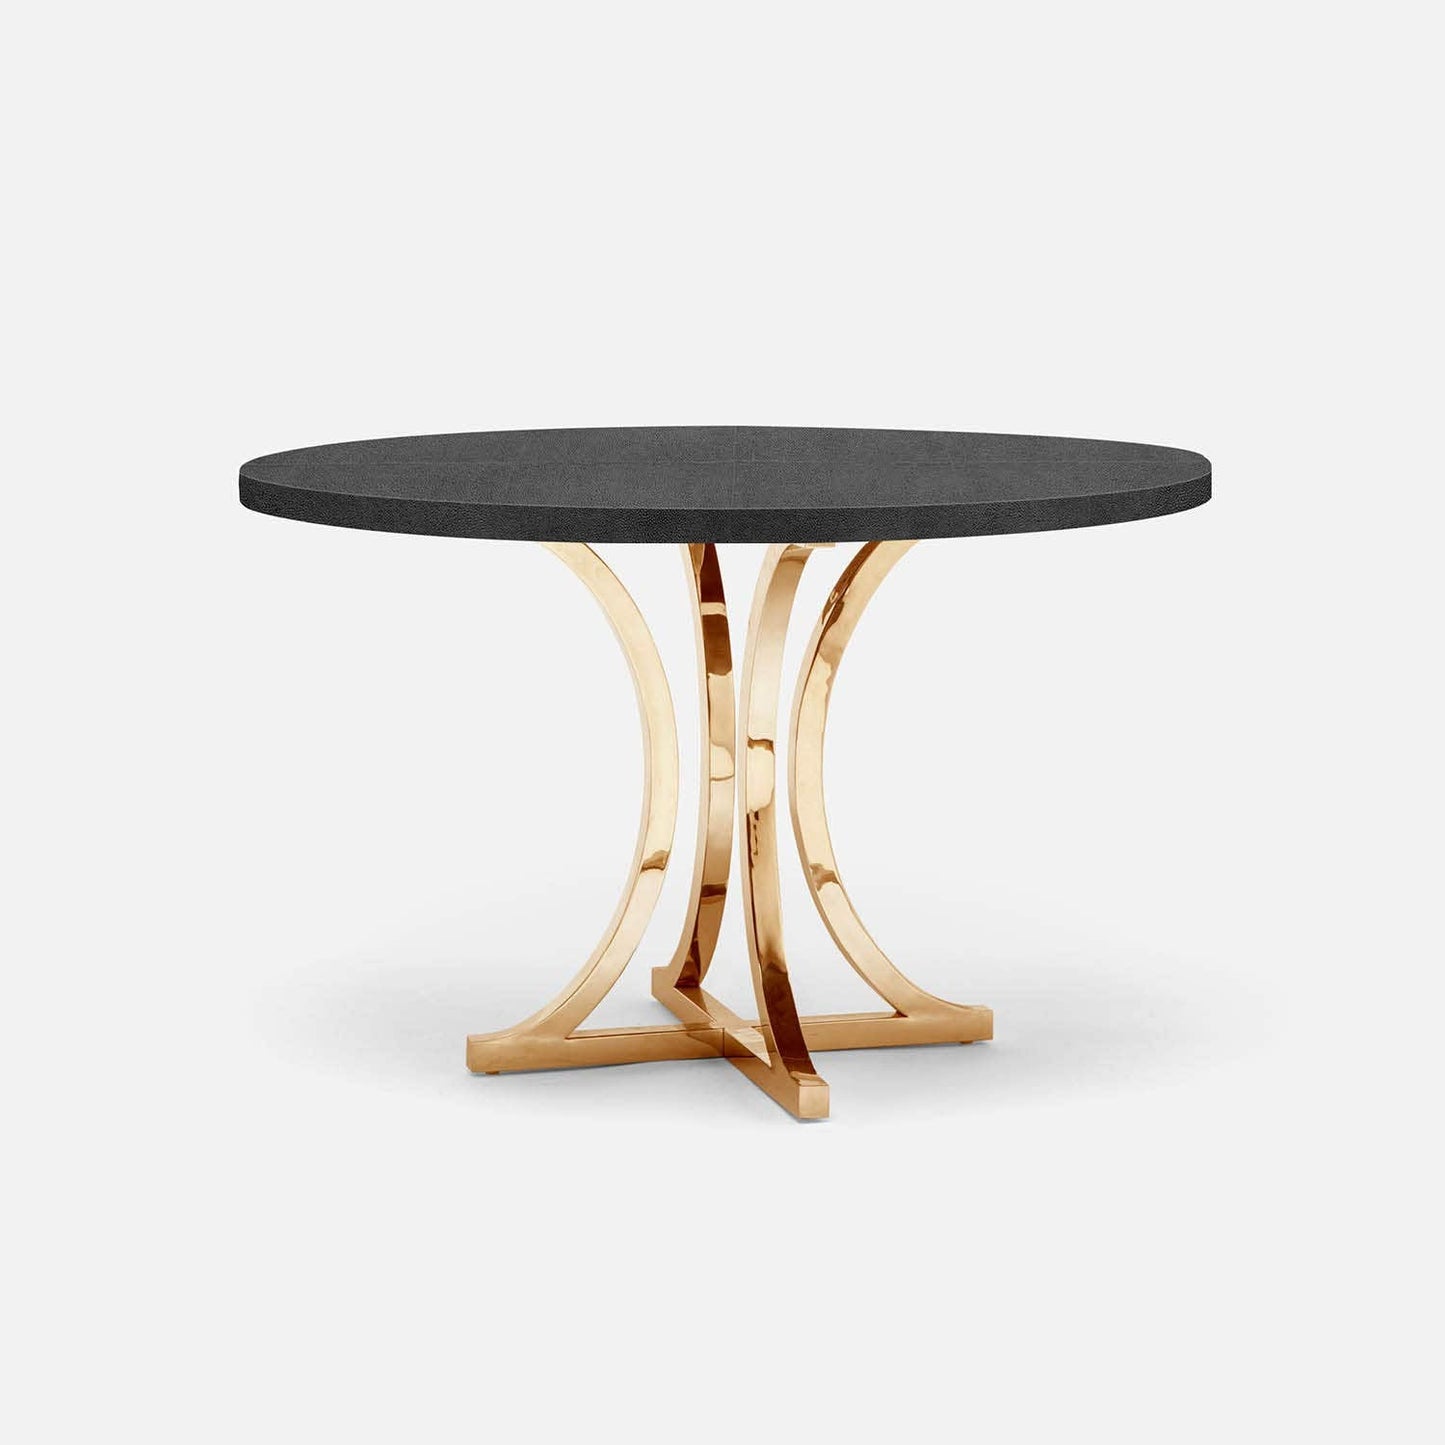 Made Goods Leighton 54" x 30" Polished Gold Steel Dinning Table With Round Black Vintage Faux Shagreen Table Top